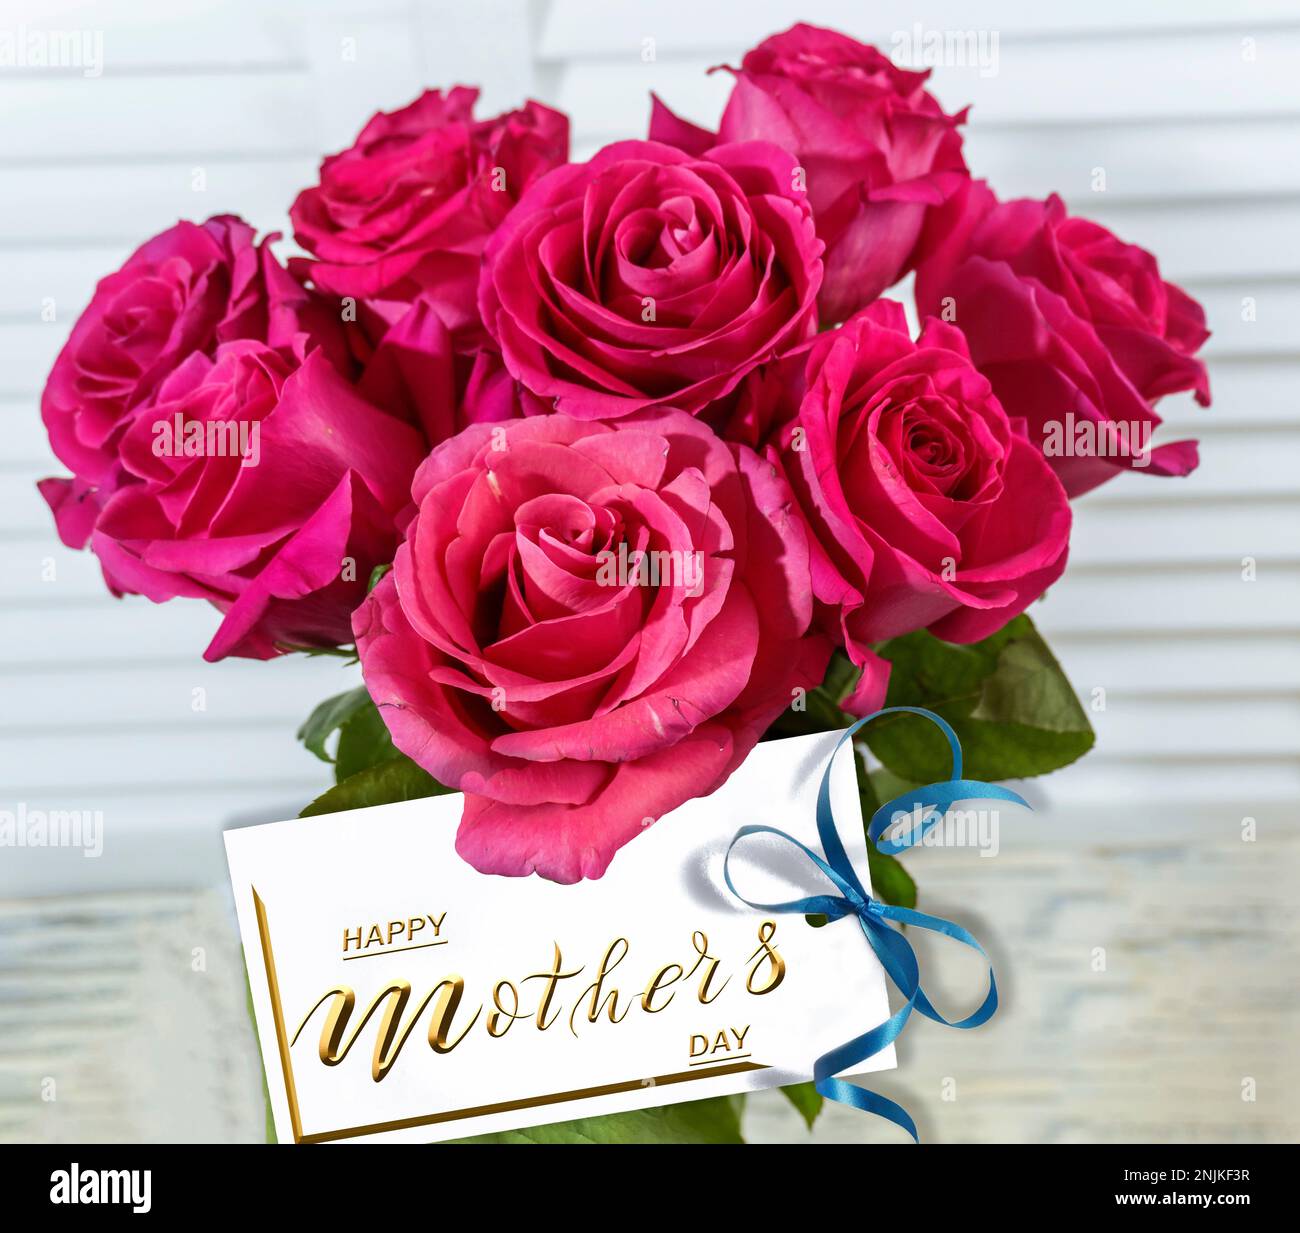 card or banner for mother's day, can be used as a flyer, 3d illustration Stock Photo